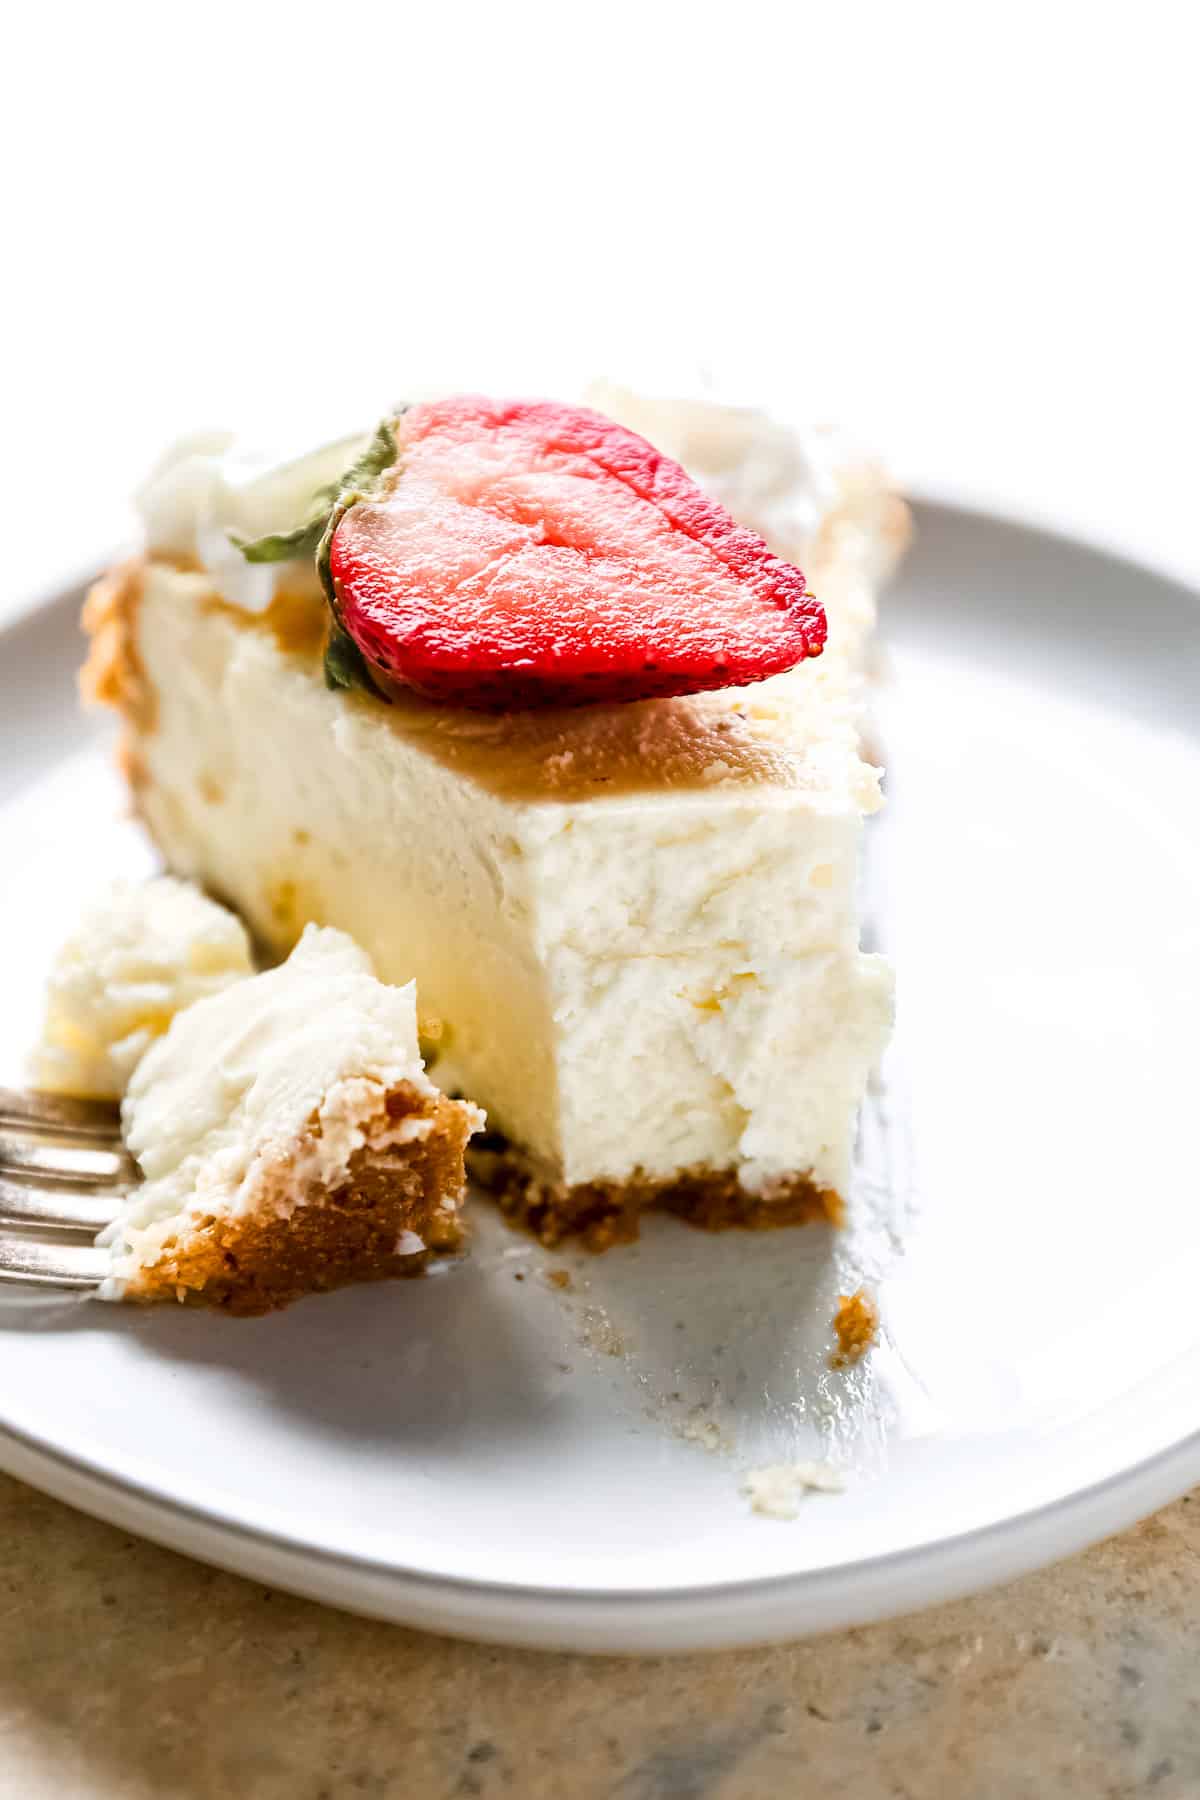 head-on view of a partially eaten slice of easy cheesecake topped with a strawberry on a white plate with a fork.